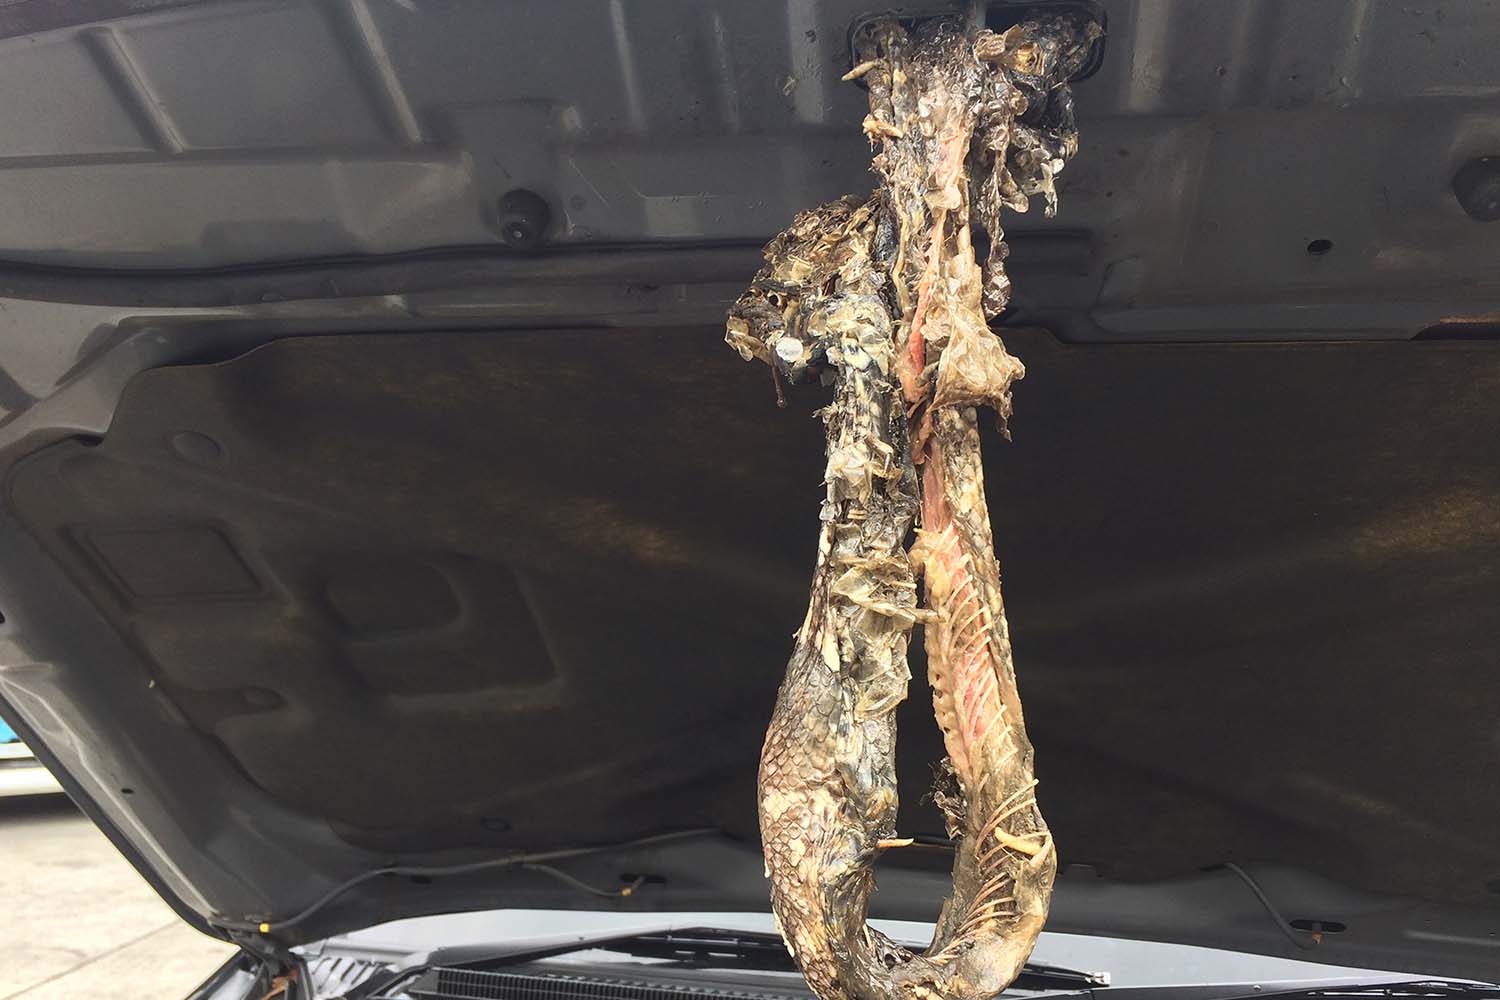 Remains of a snake that has died within the engine bay of a vehicle.